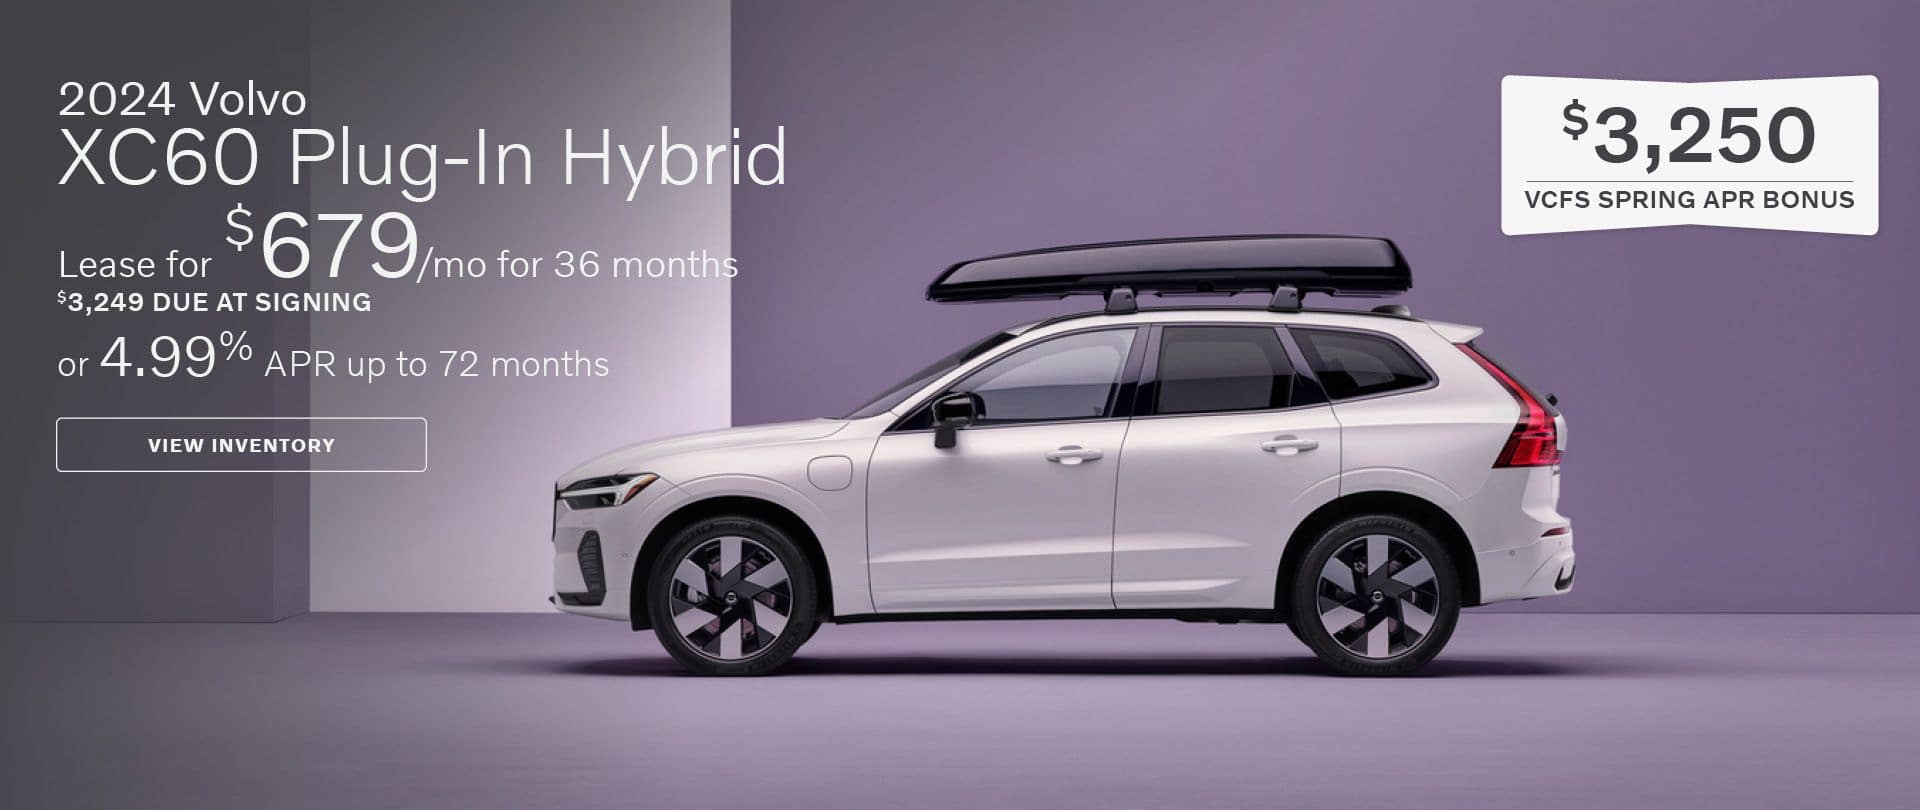 Southern_ROR-Apr24-2024 Volvo XC60 Plug-In Hybrid | Lease for $679:mo_1920x810